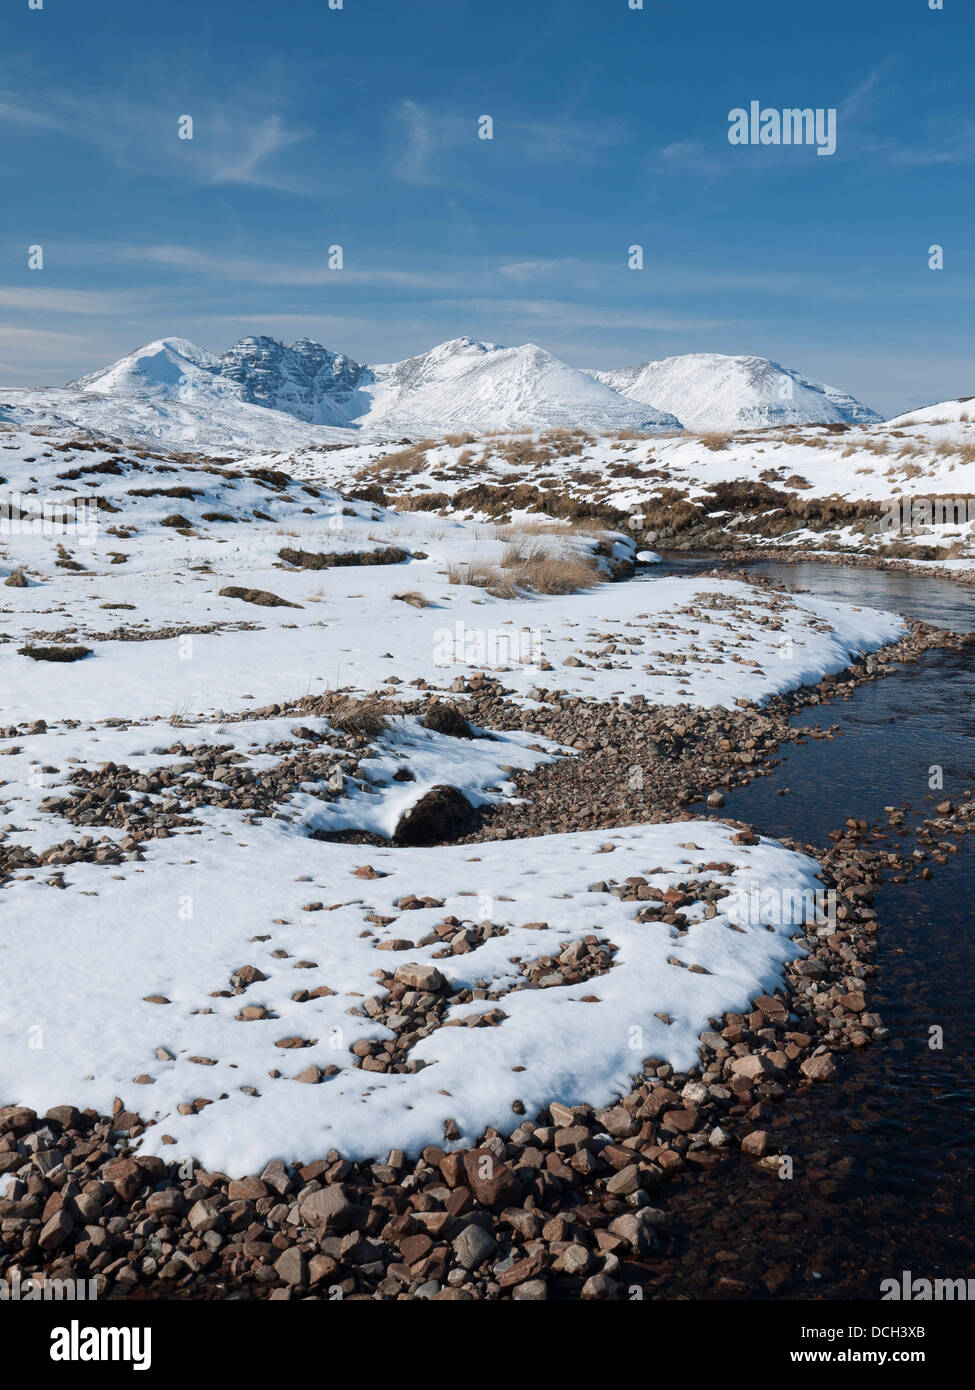 A view of the mountain An Teallach in winter with the Dundonnell River in the foreground, Highlands, Scotland, UK Stock Photo